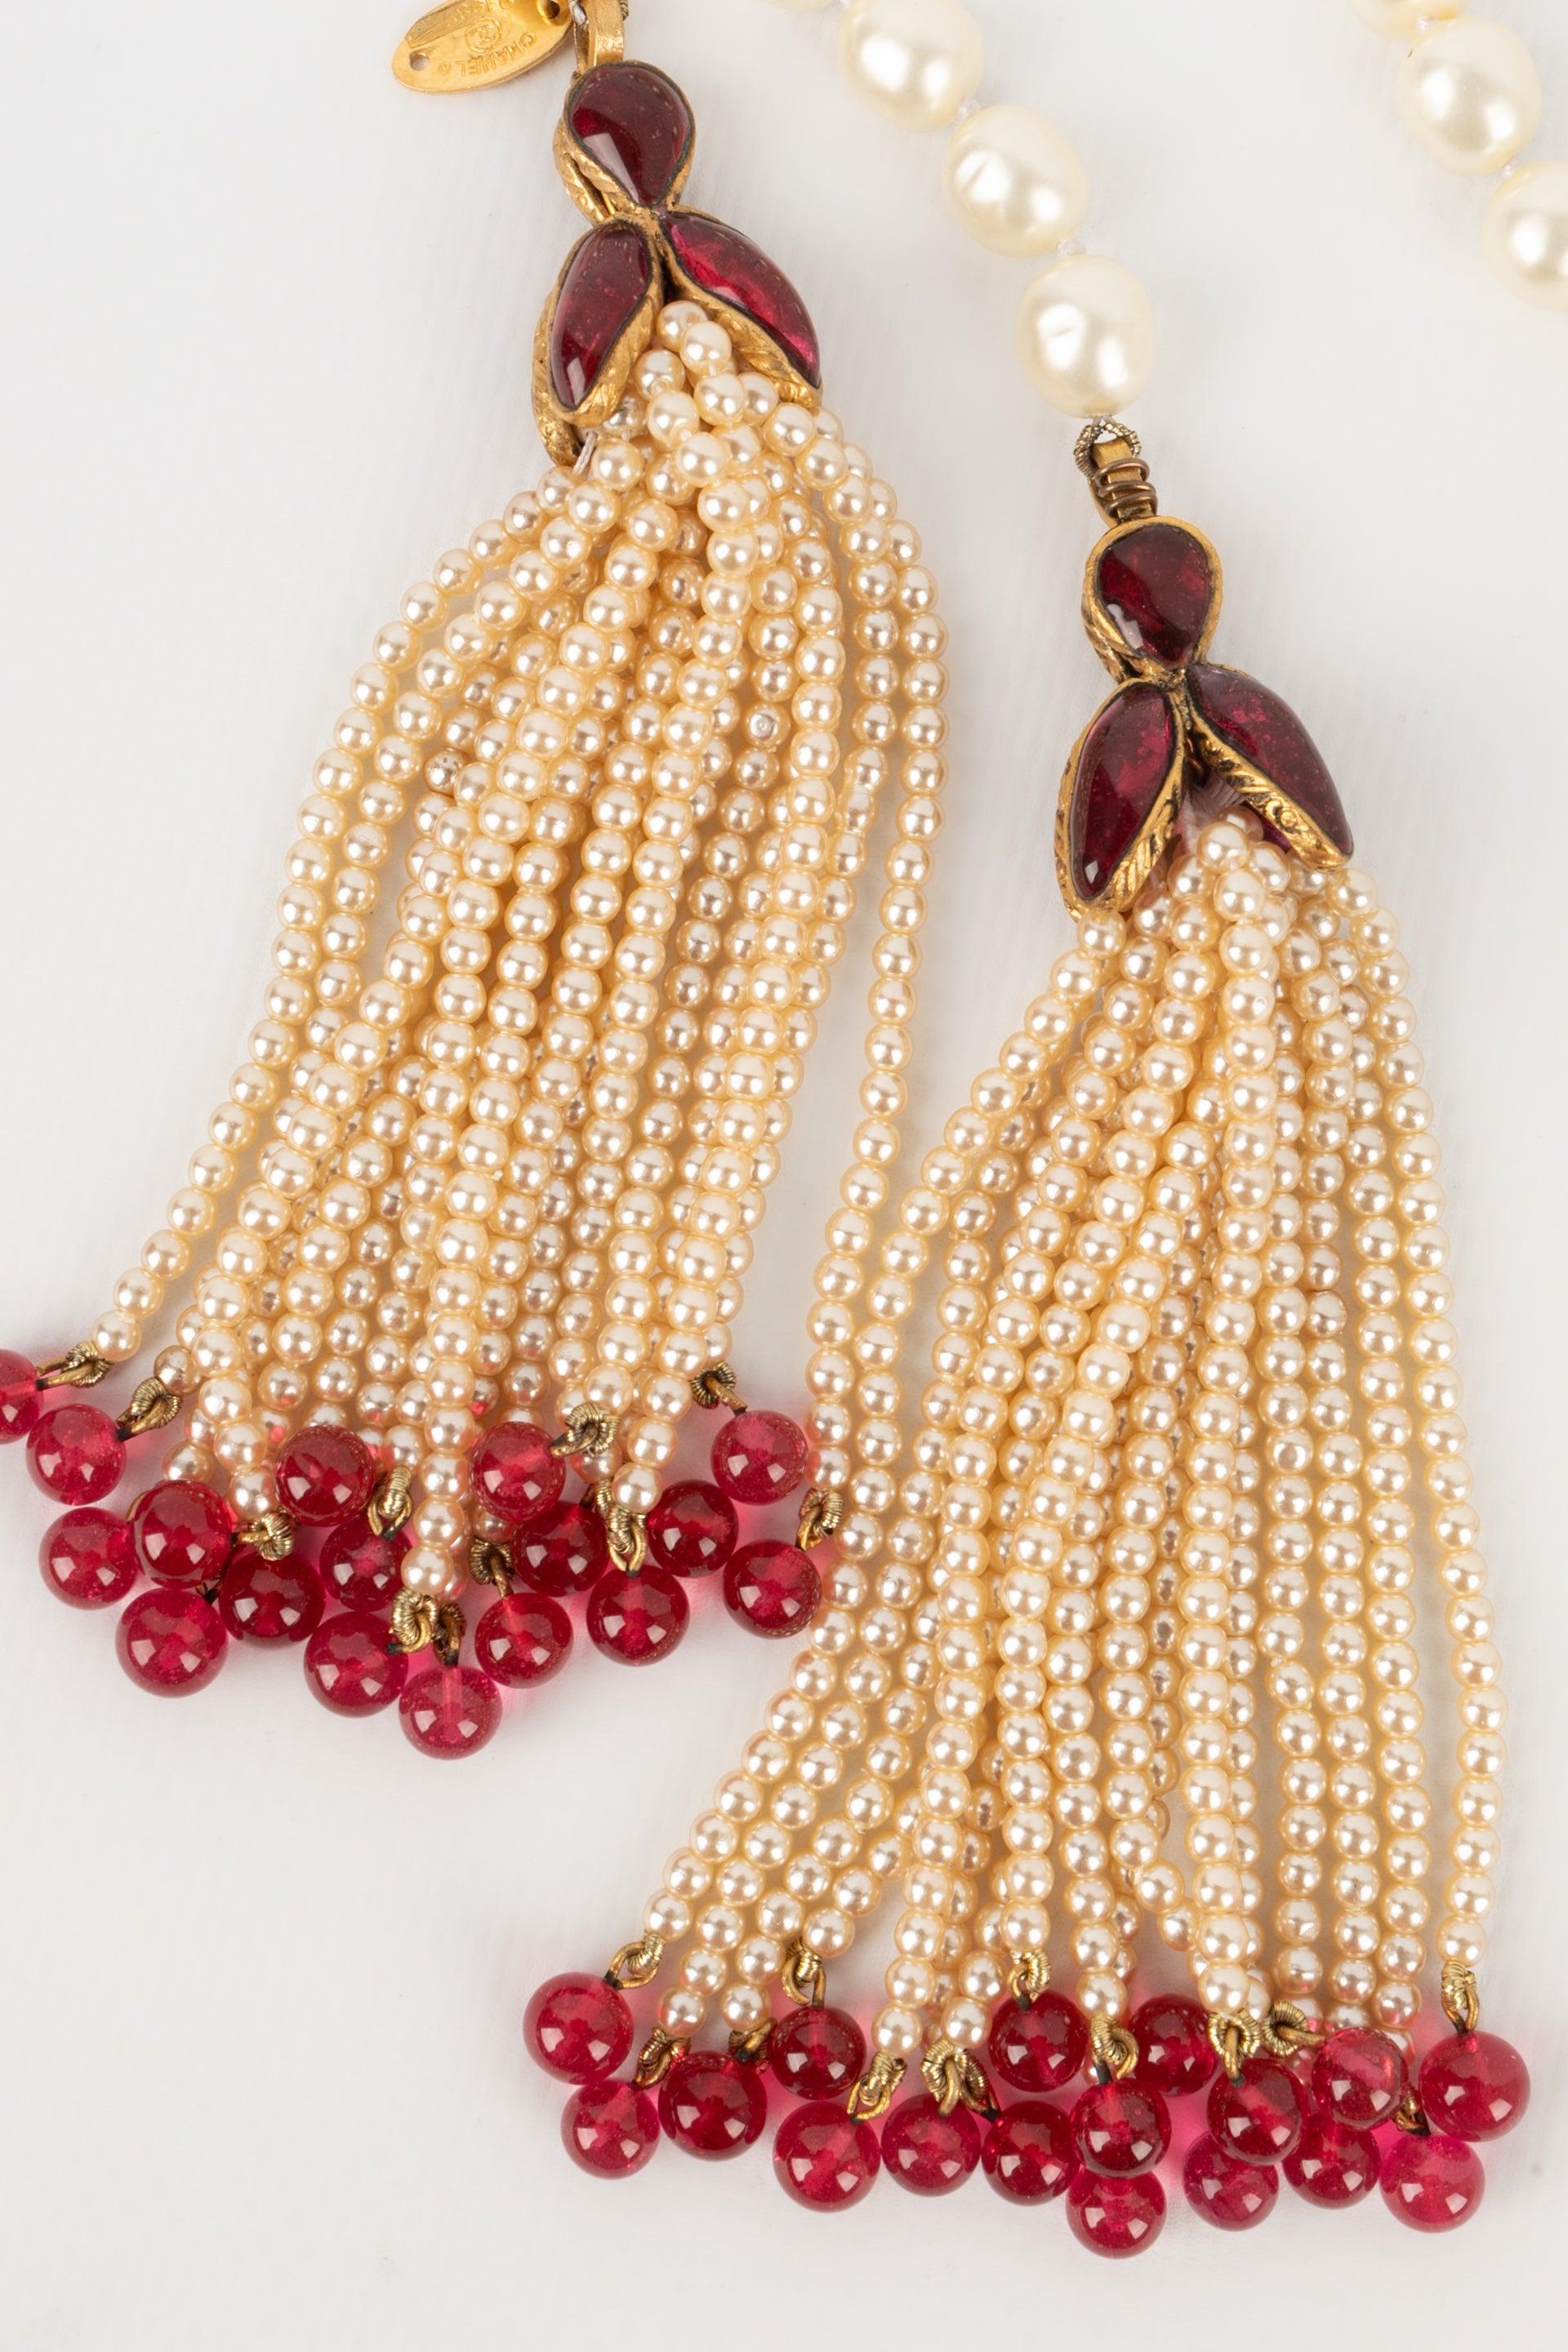 Chanel Tie Necklace with Knot Assembled Costume Pearls, 1983 For Sale 5